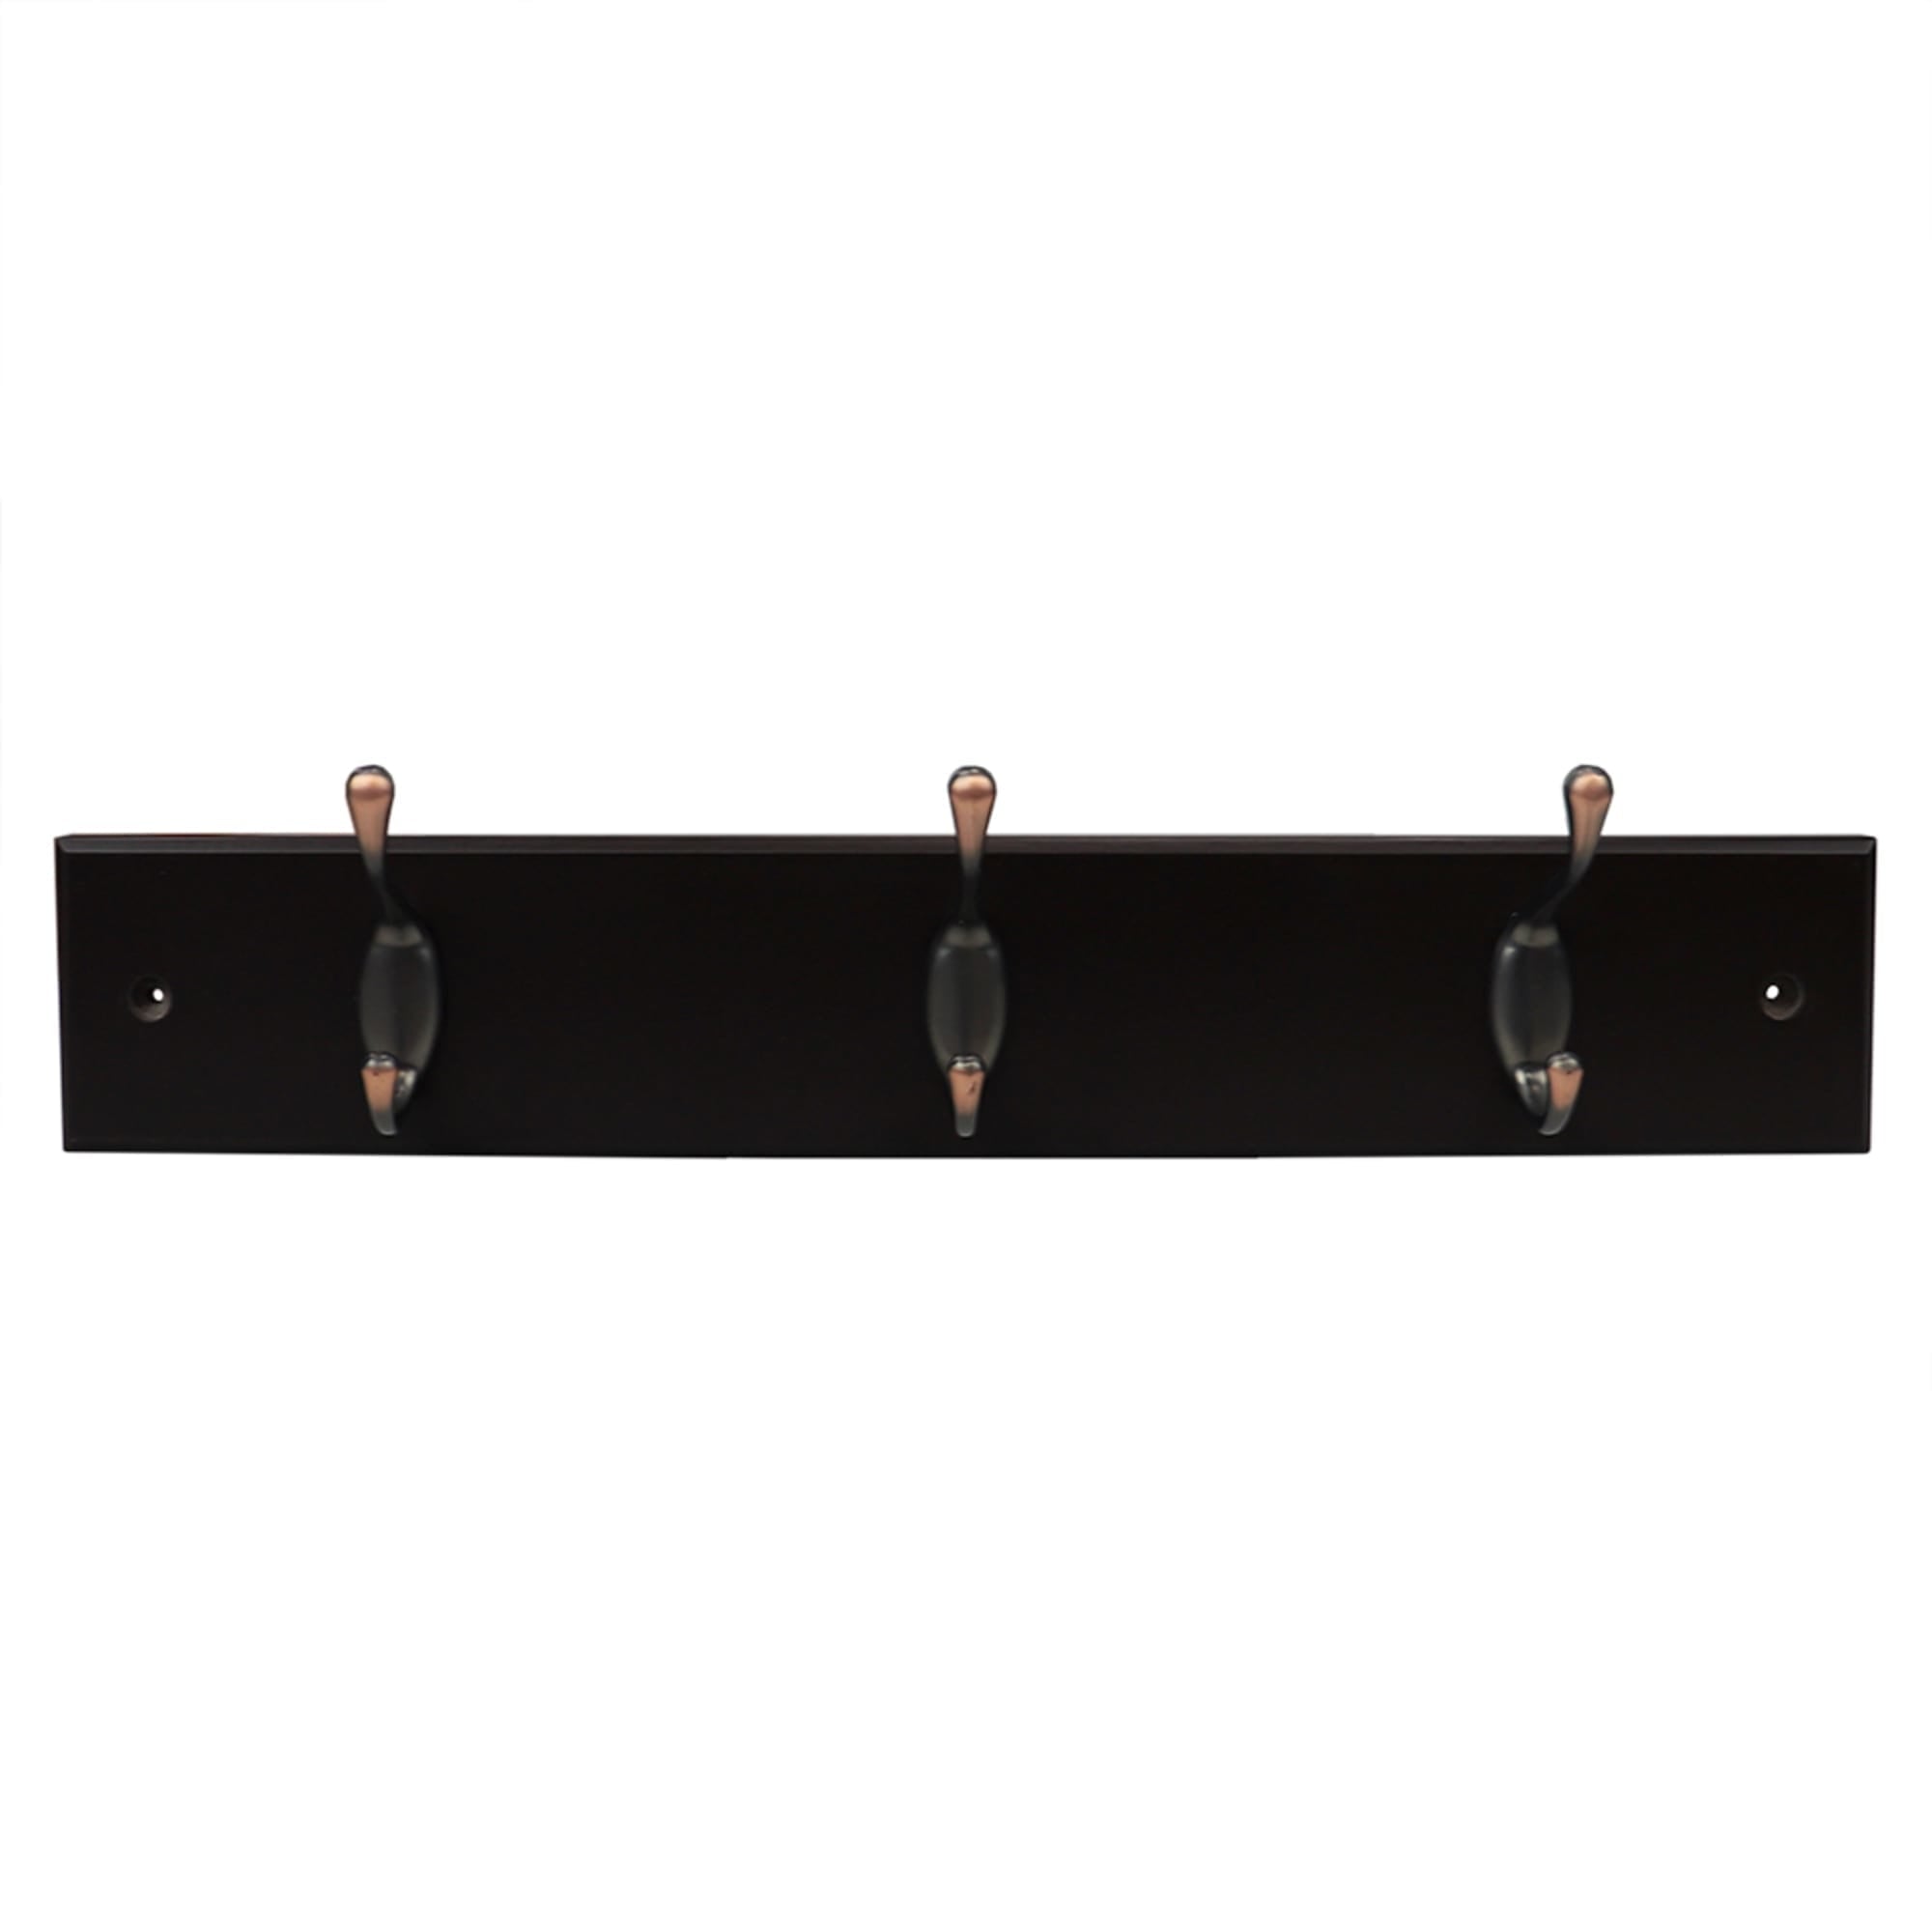 Home Basics 3 Double Hook Wall Mounted Hanging Rack, Brown $8.00 EACH, CASE PACK OF 12